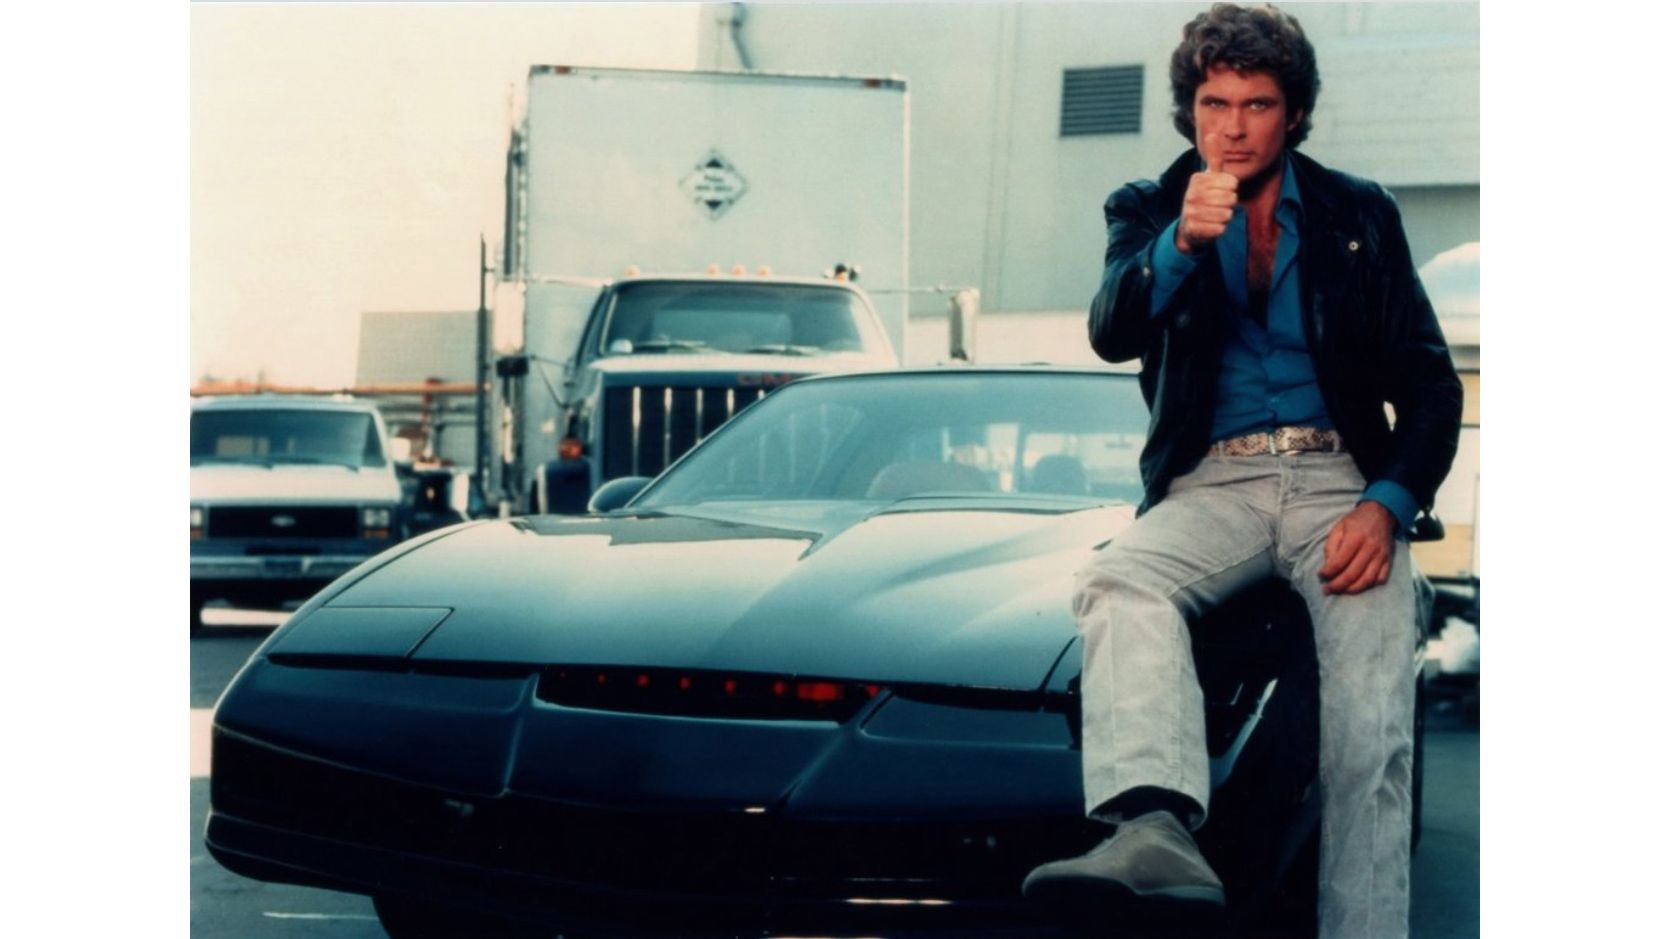 Knight Rider' is apparently getting remade into a film—but what